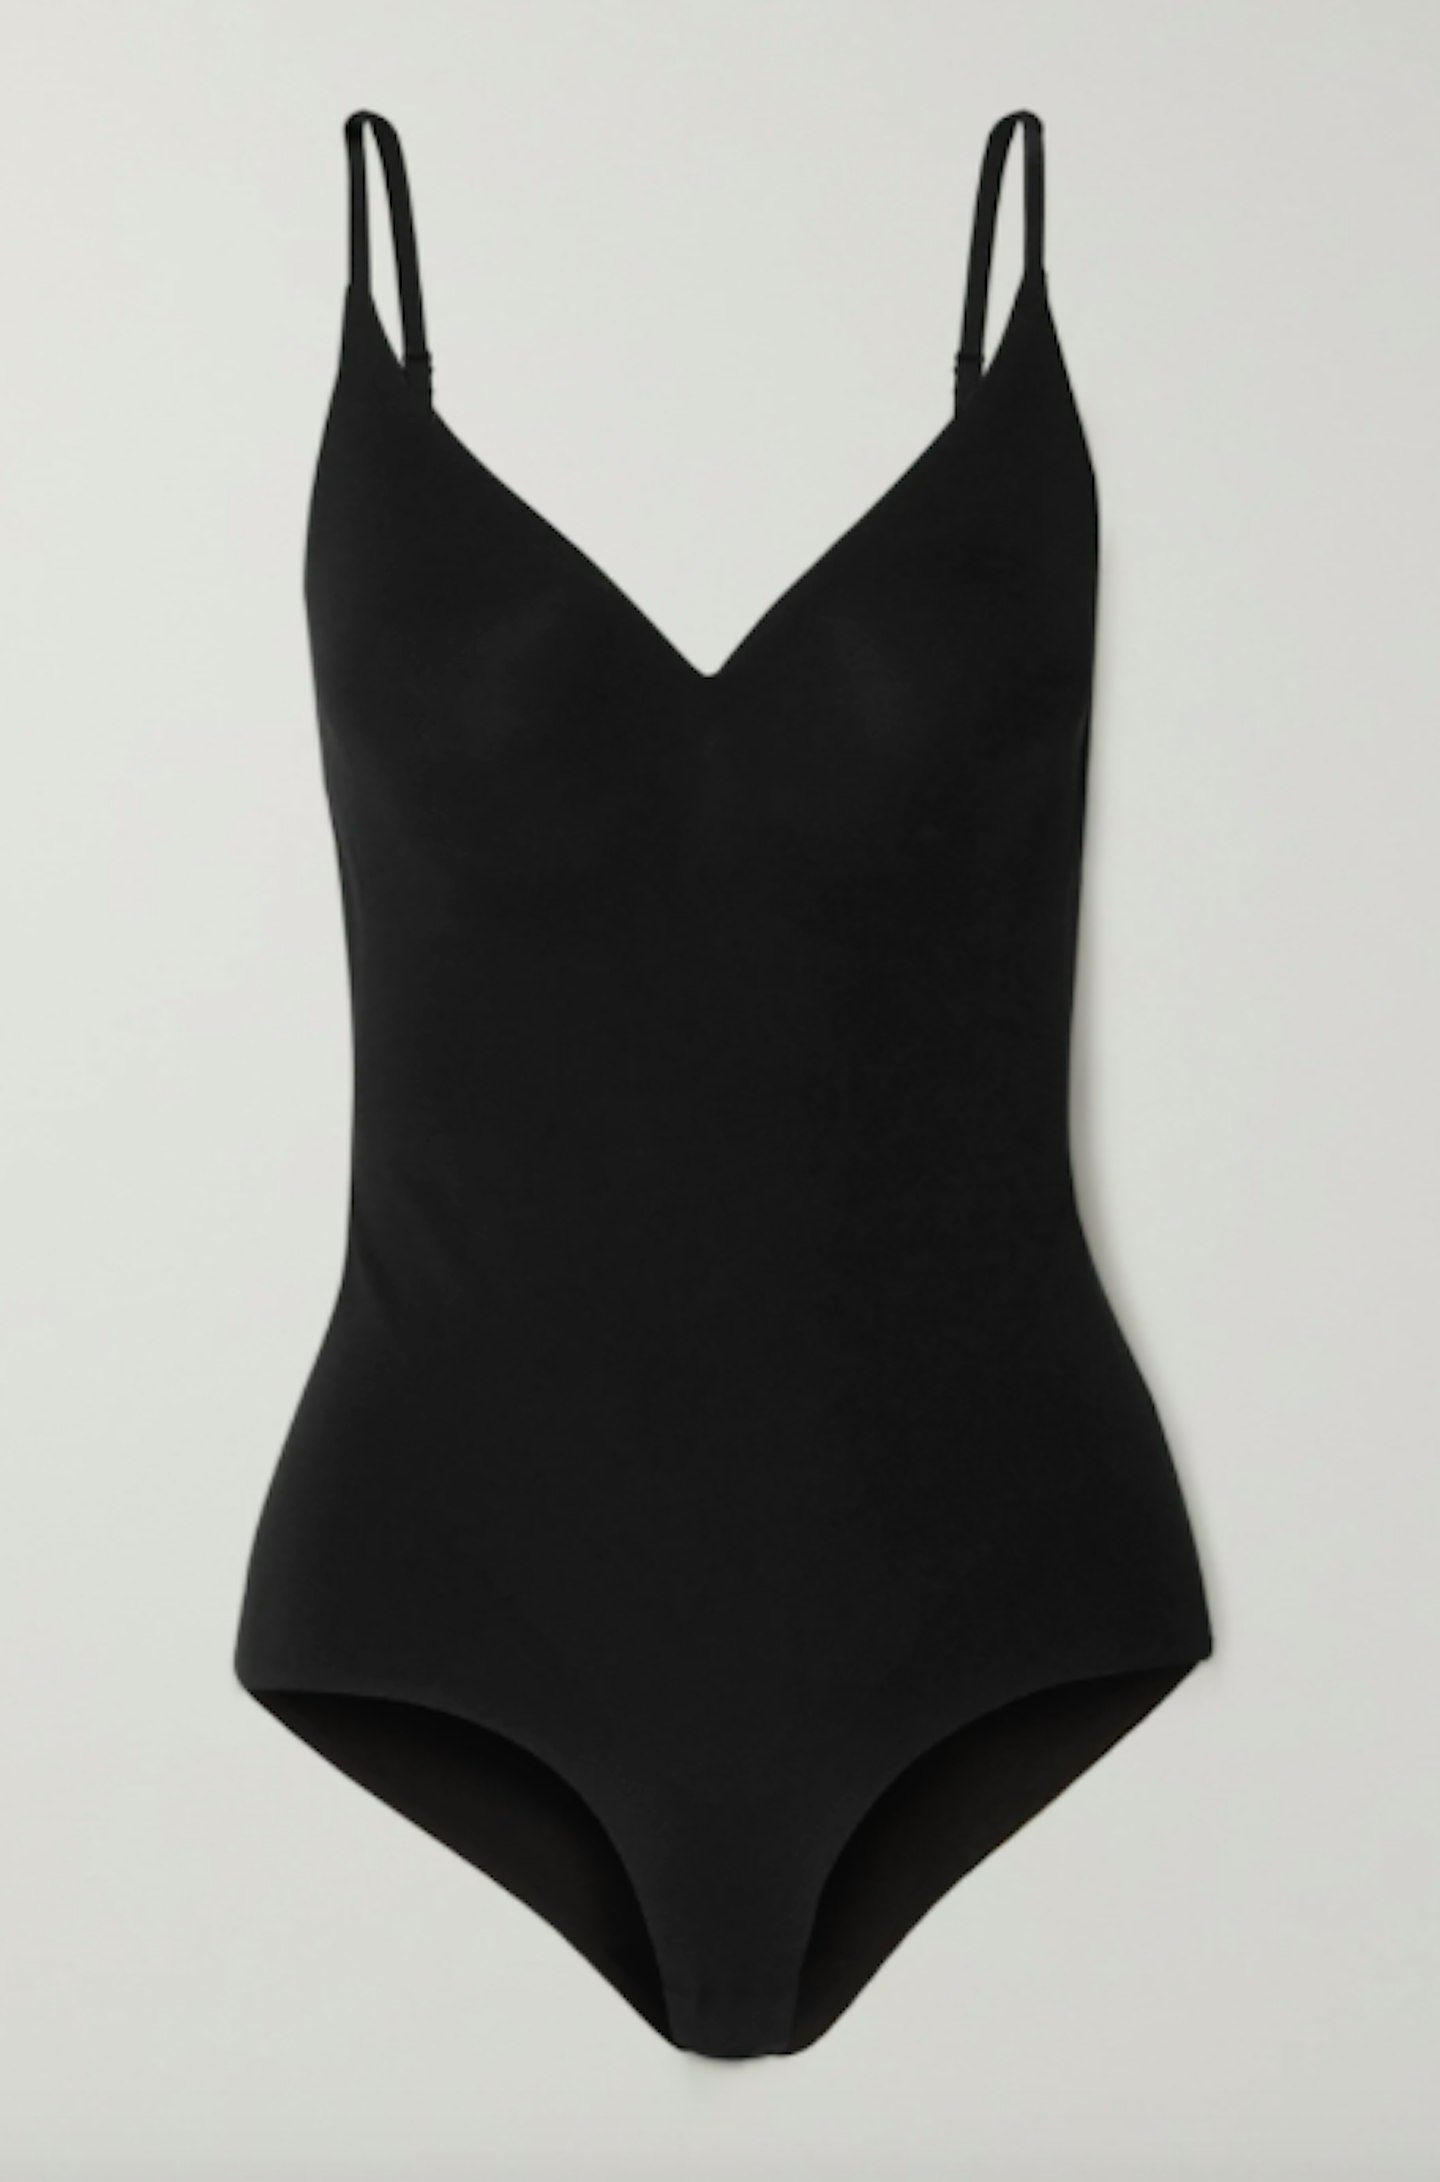 Heist, The Outer shaping bodysuit, £95 at Net-a-Porter